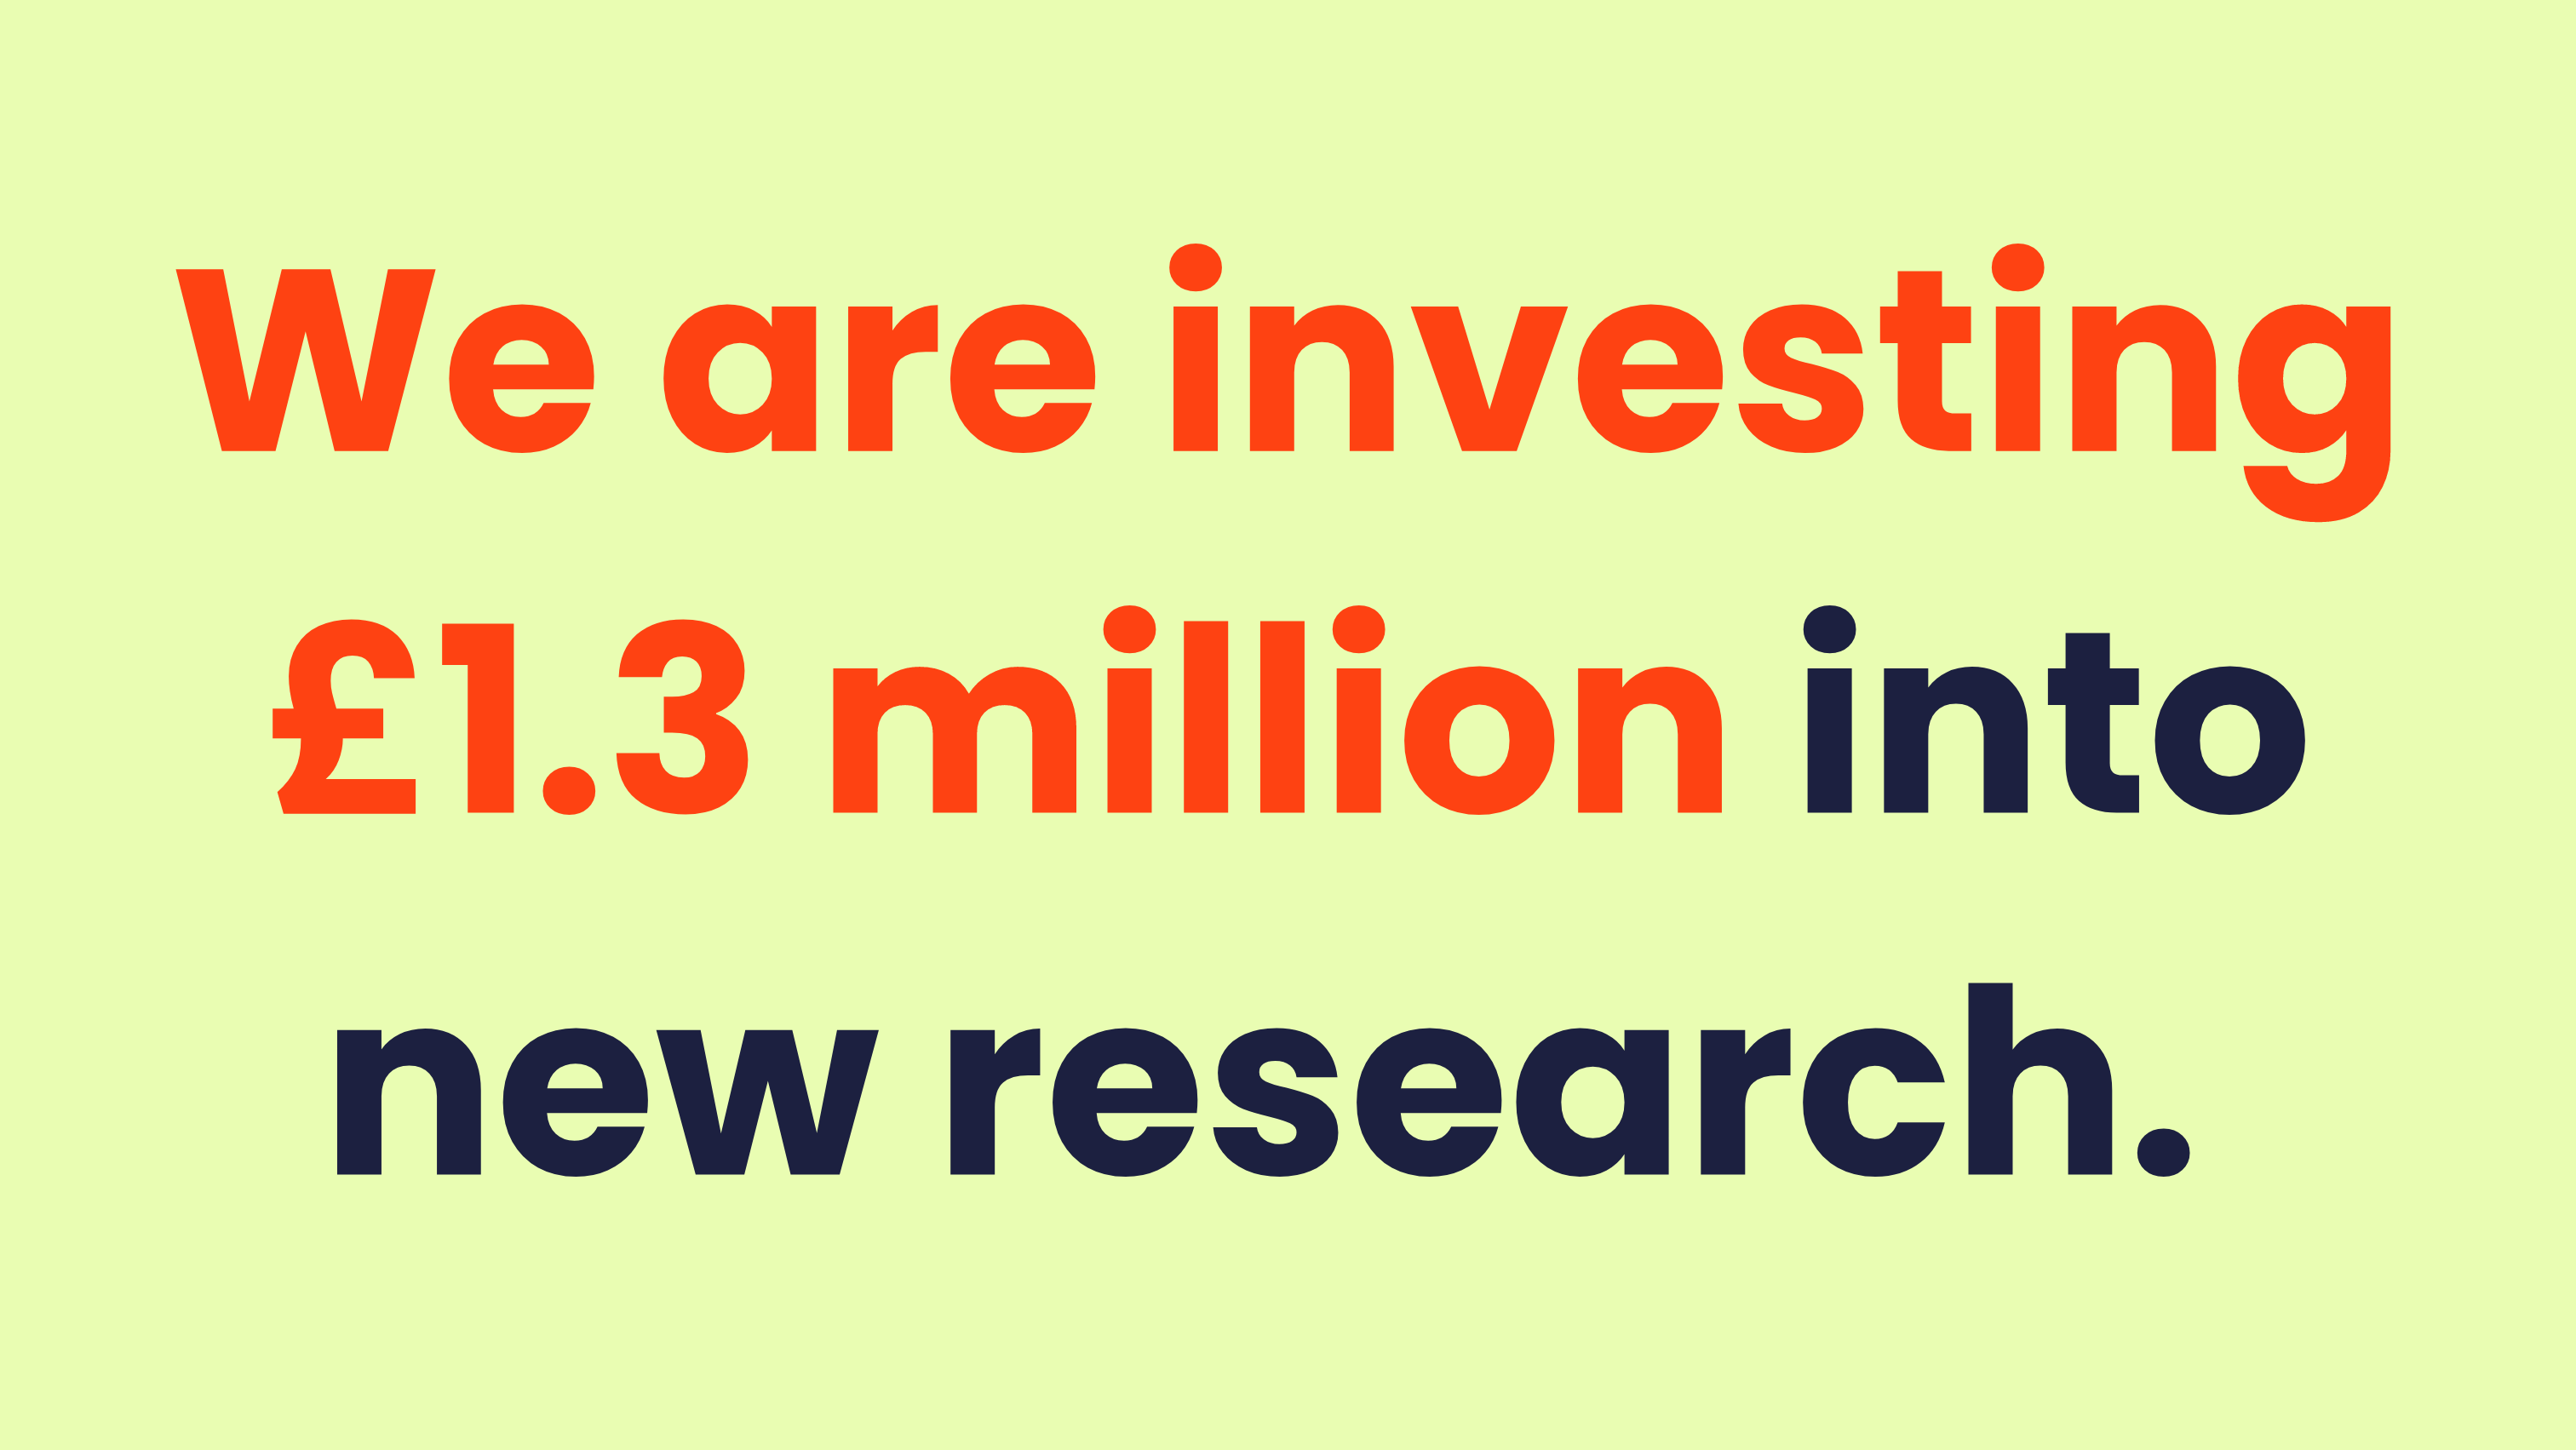 On a bright green background words read "We are investing 1.3 million into new research."